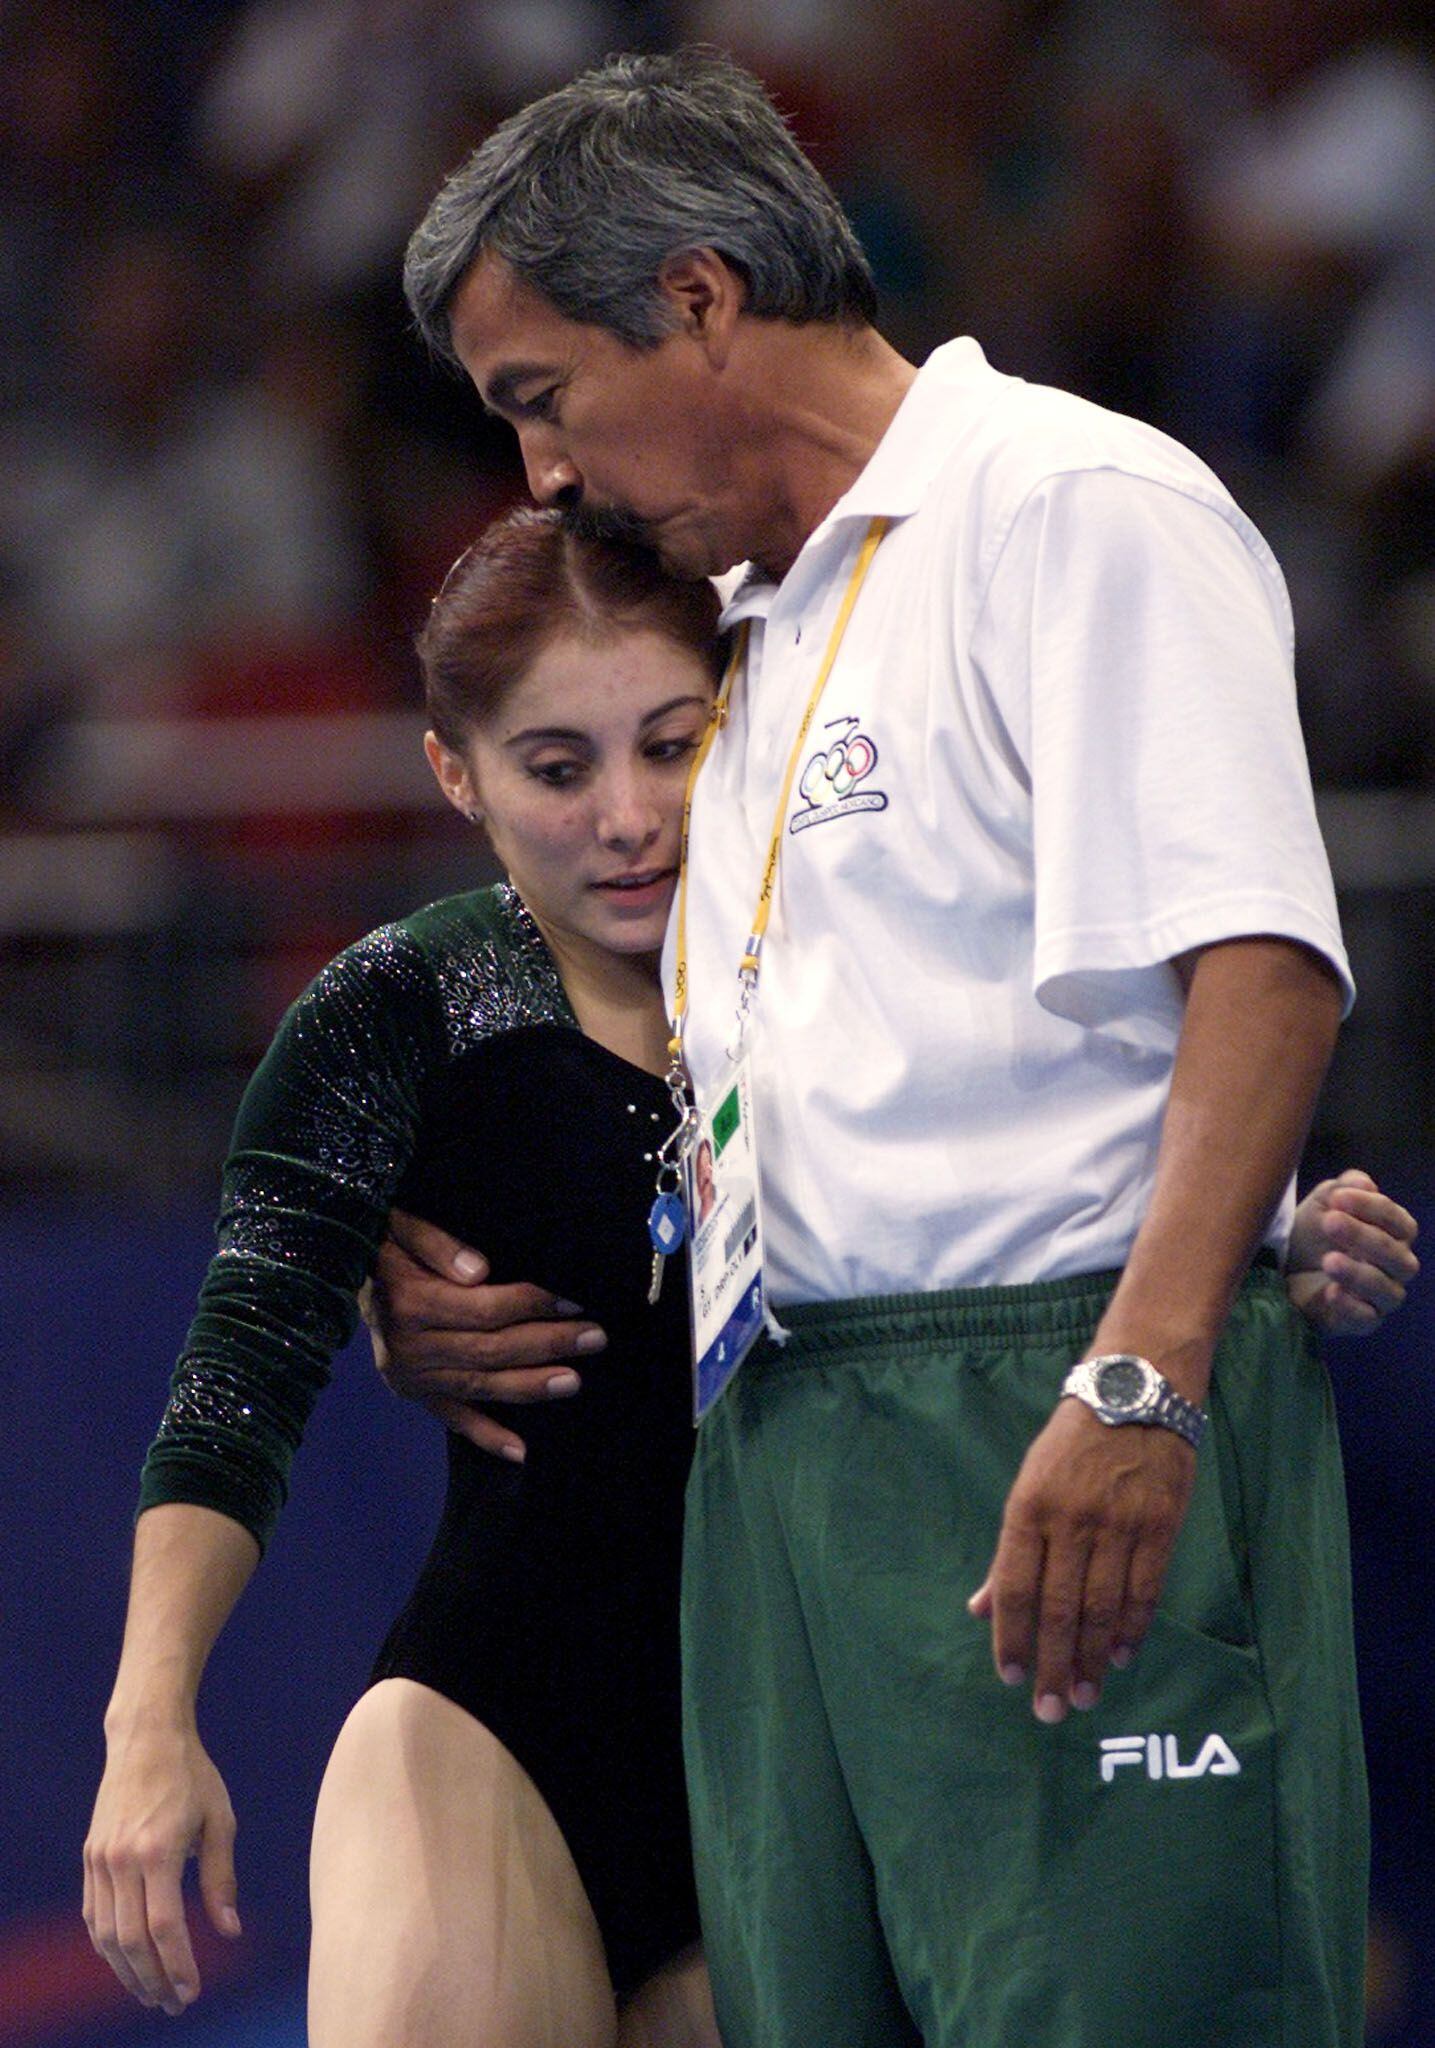 Mexican gymnast Denisse Lopez is embraced by coach Eduardo Carmona after her performance in the women's individual apparatus vault competition at the Olympic Games in Sydney, September 24, 2000. Lopez finished in eighth position behind gold medalist Elena Zamolodtchikova of Russia, silver medalist Andreea Raducan of Romania and bronze medalist Ekaterina Lobazniouk of Russia.     REUTERS/Mike Blake